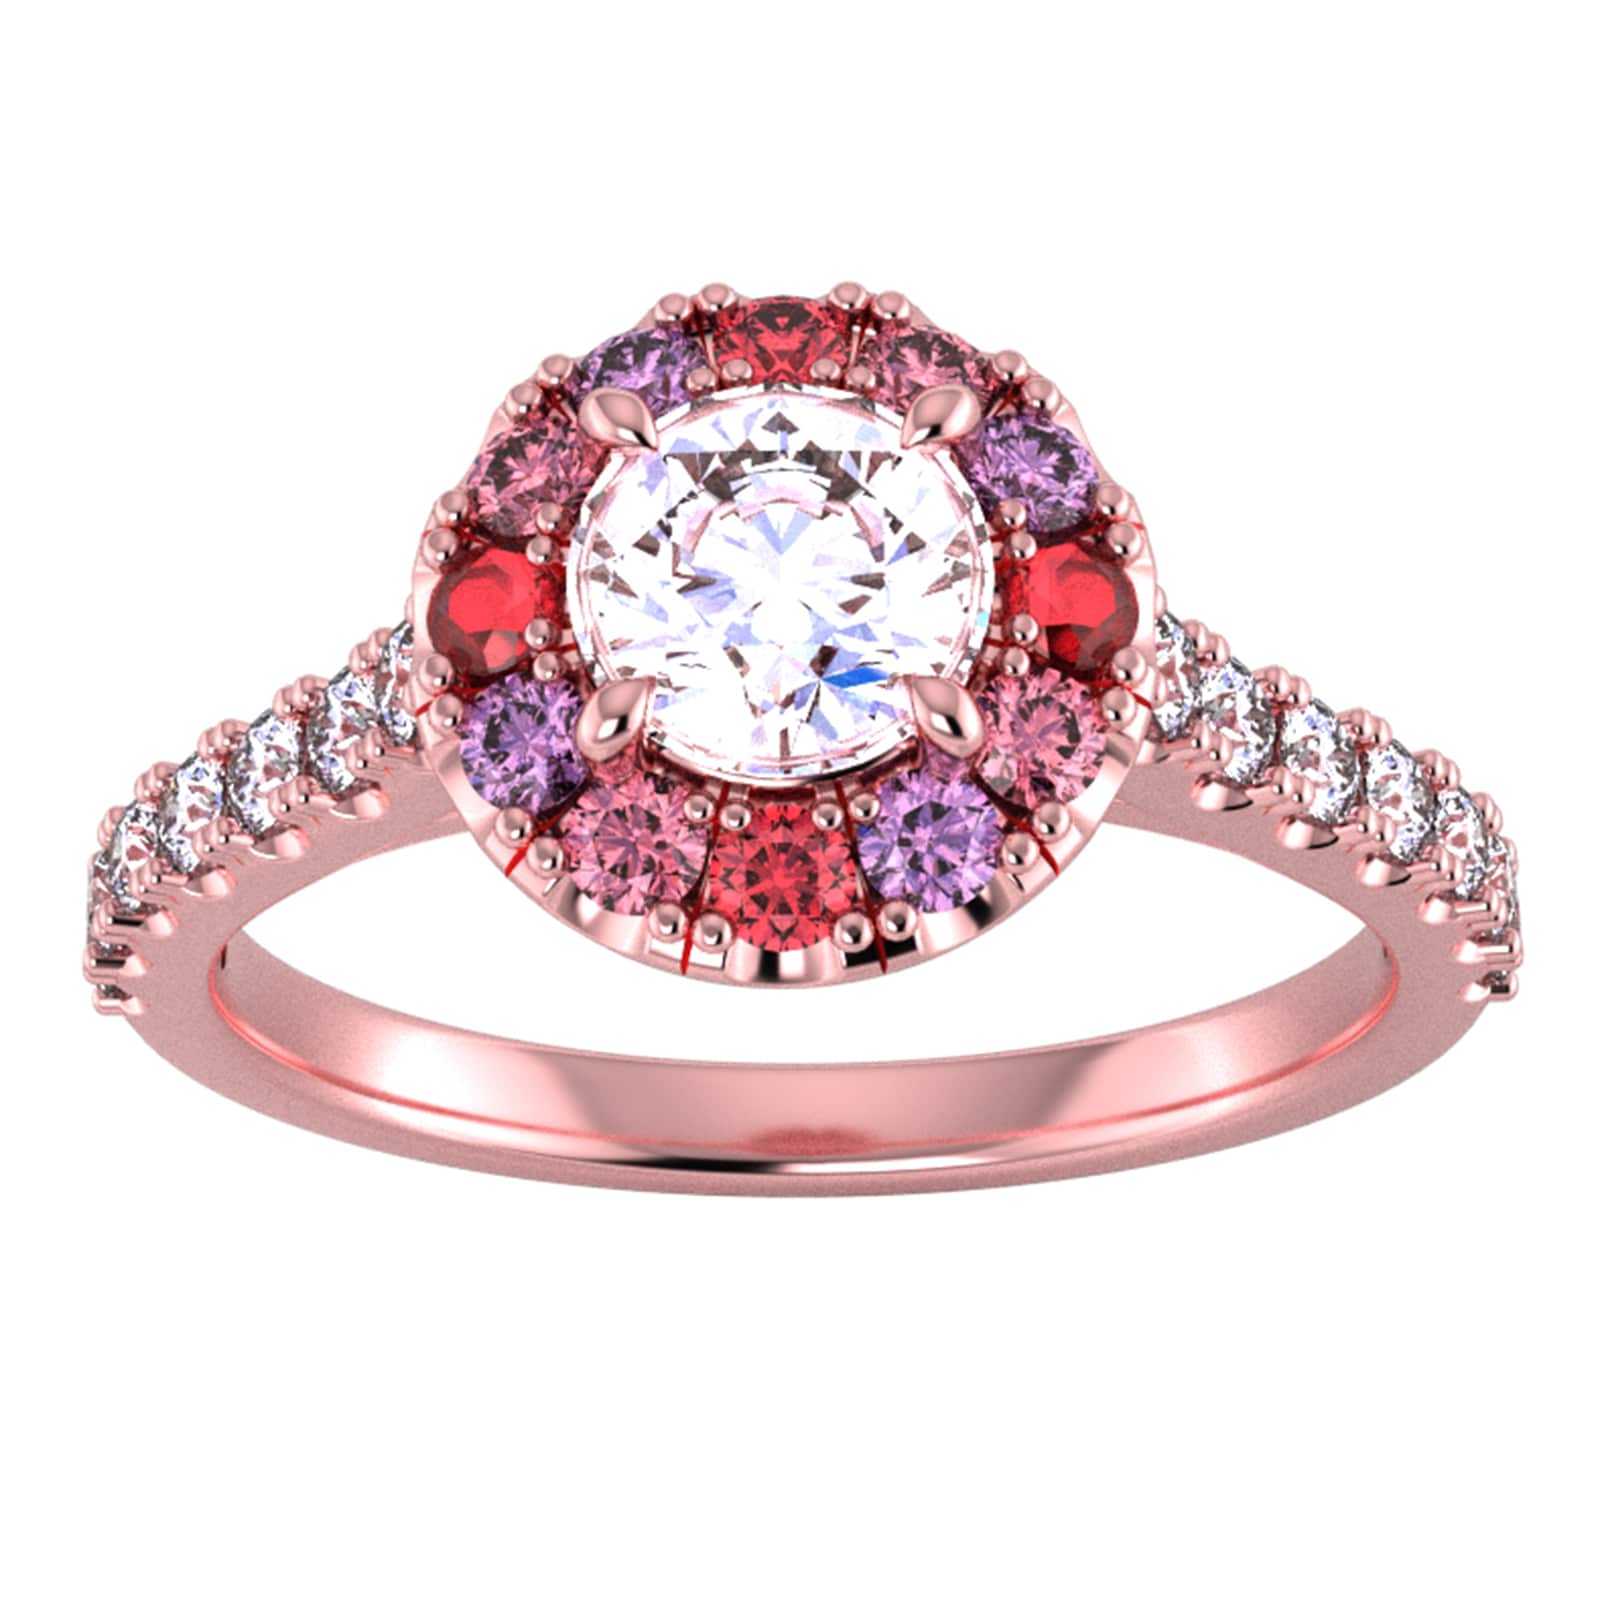 18ct Rose Gold Diamond & Pink, Red, Purple Sapphire Halo Ring - Ring Size T